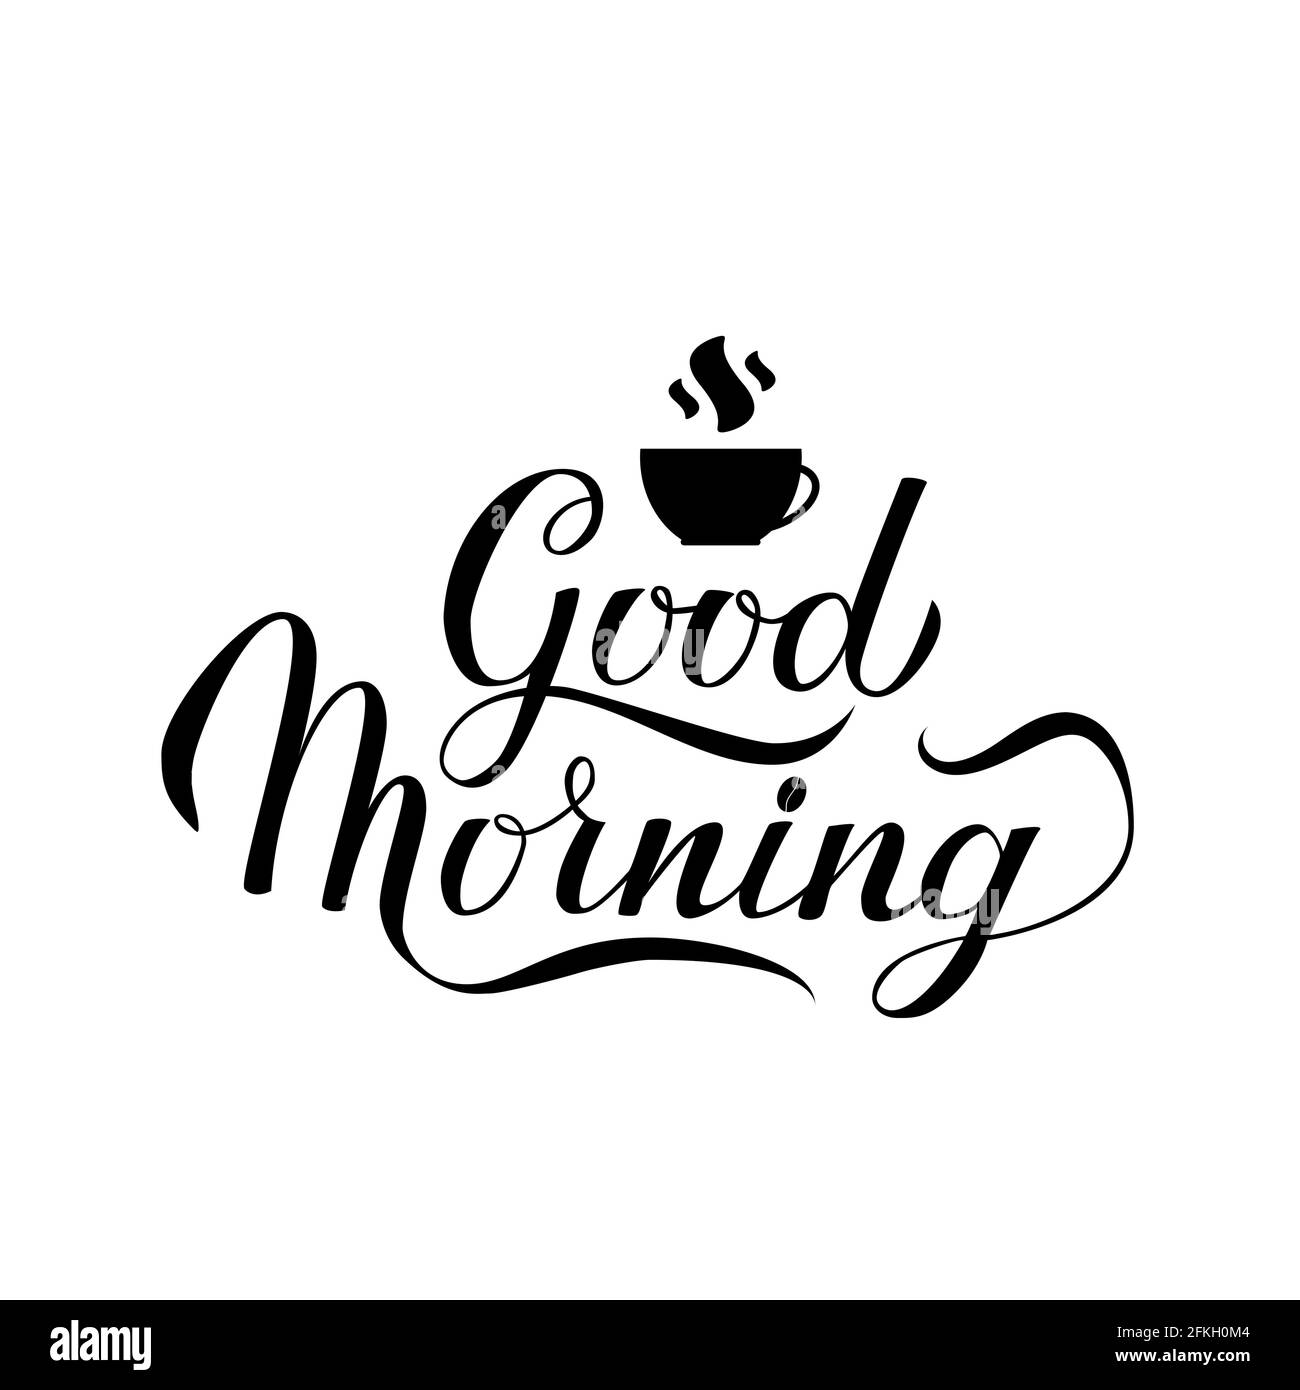 Good Morning calligraphy hand lettering with cup of coffee isolated on ...